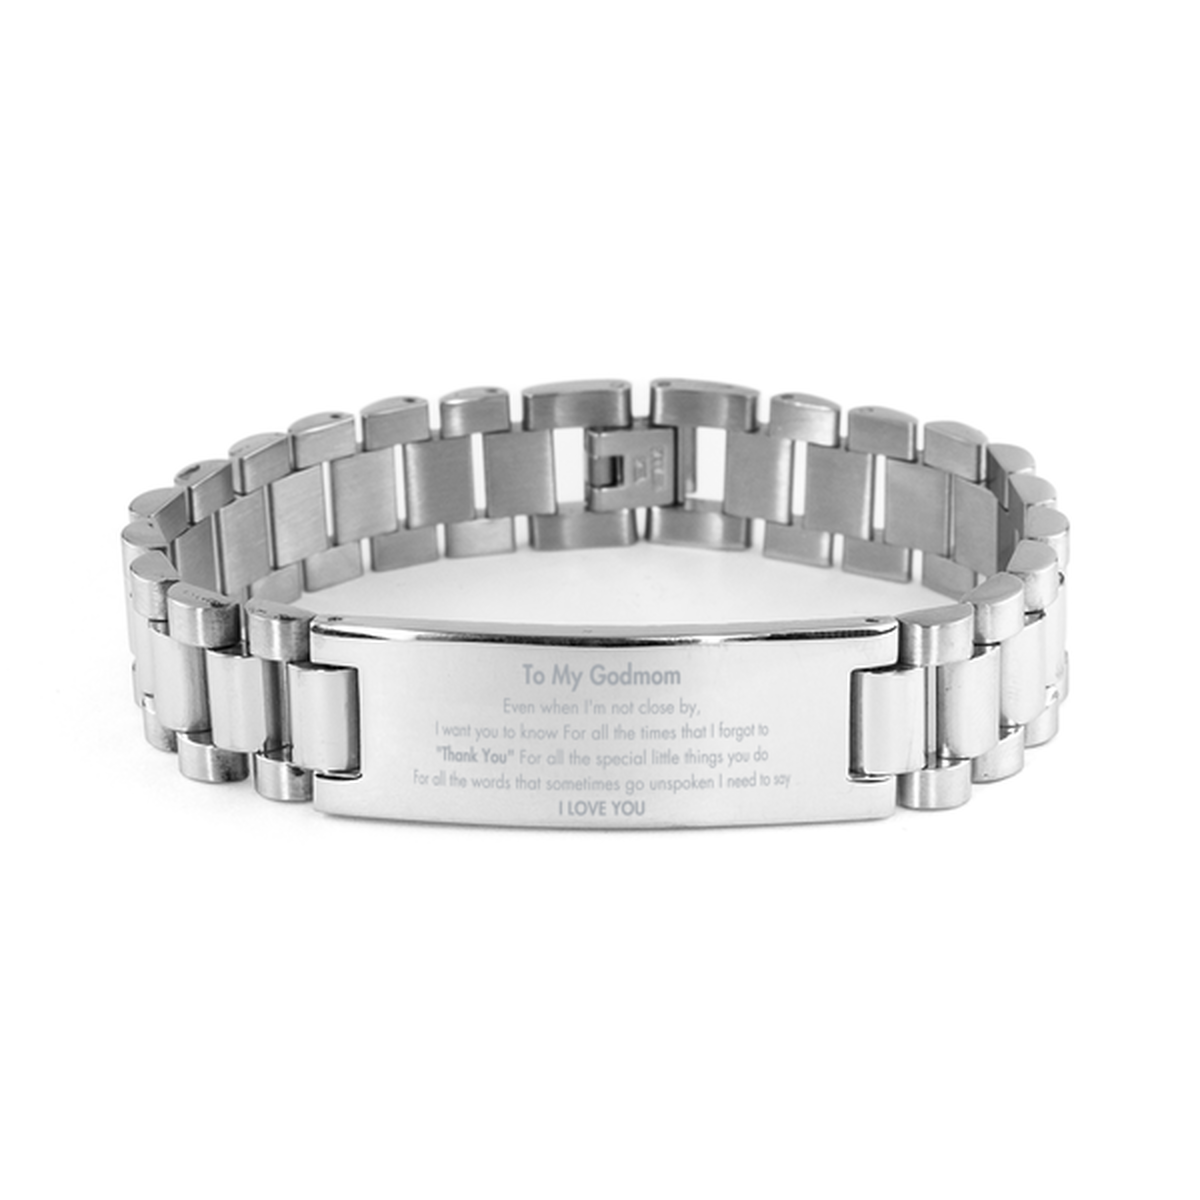 Thank You Gifts for Godmom, Keepsake Ladder Stainless Steel Bracelet Gifts for Godmom Birthday Mother's day Father's Day Godmom For all the words That sometimes go unspoken I need to say I LOVE YOU